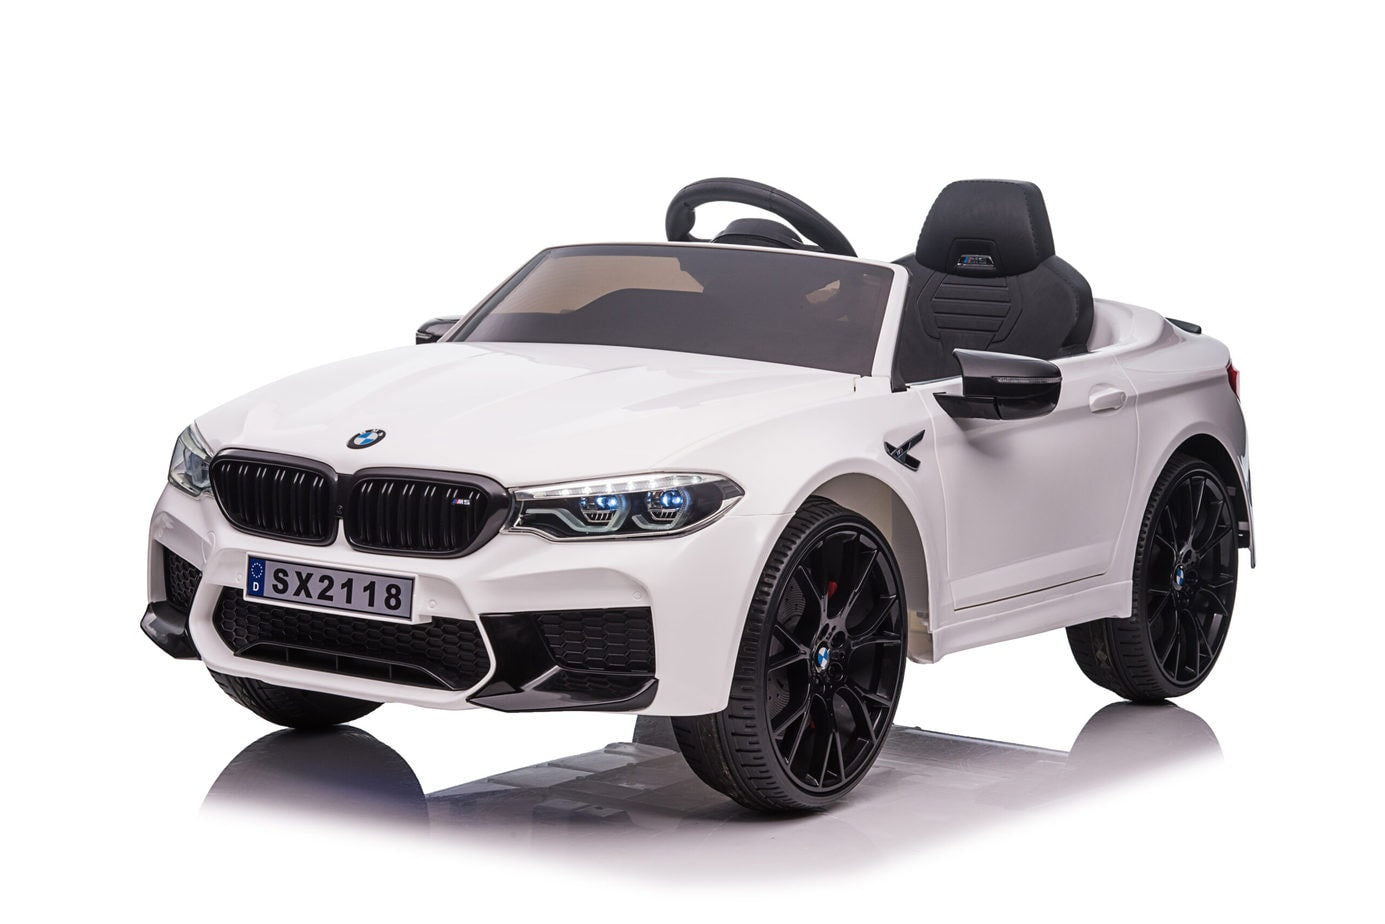 White BMW M5 Drift electric ride-on car for kids, 24-volt, showcased on a pristine white backdrop